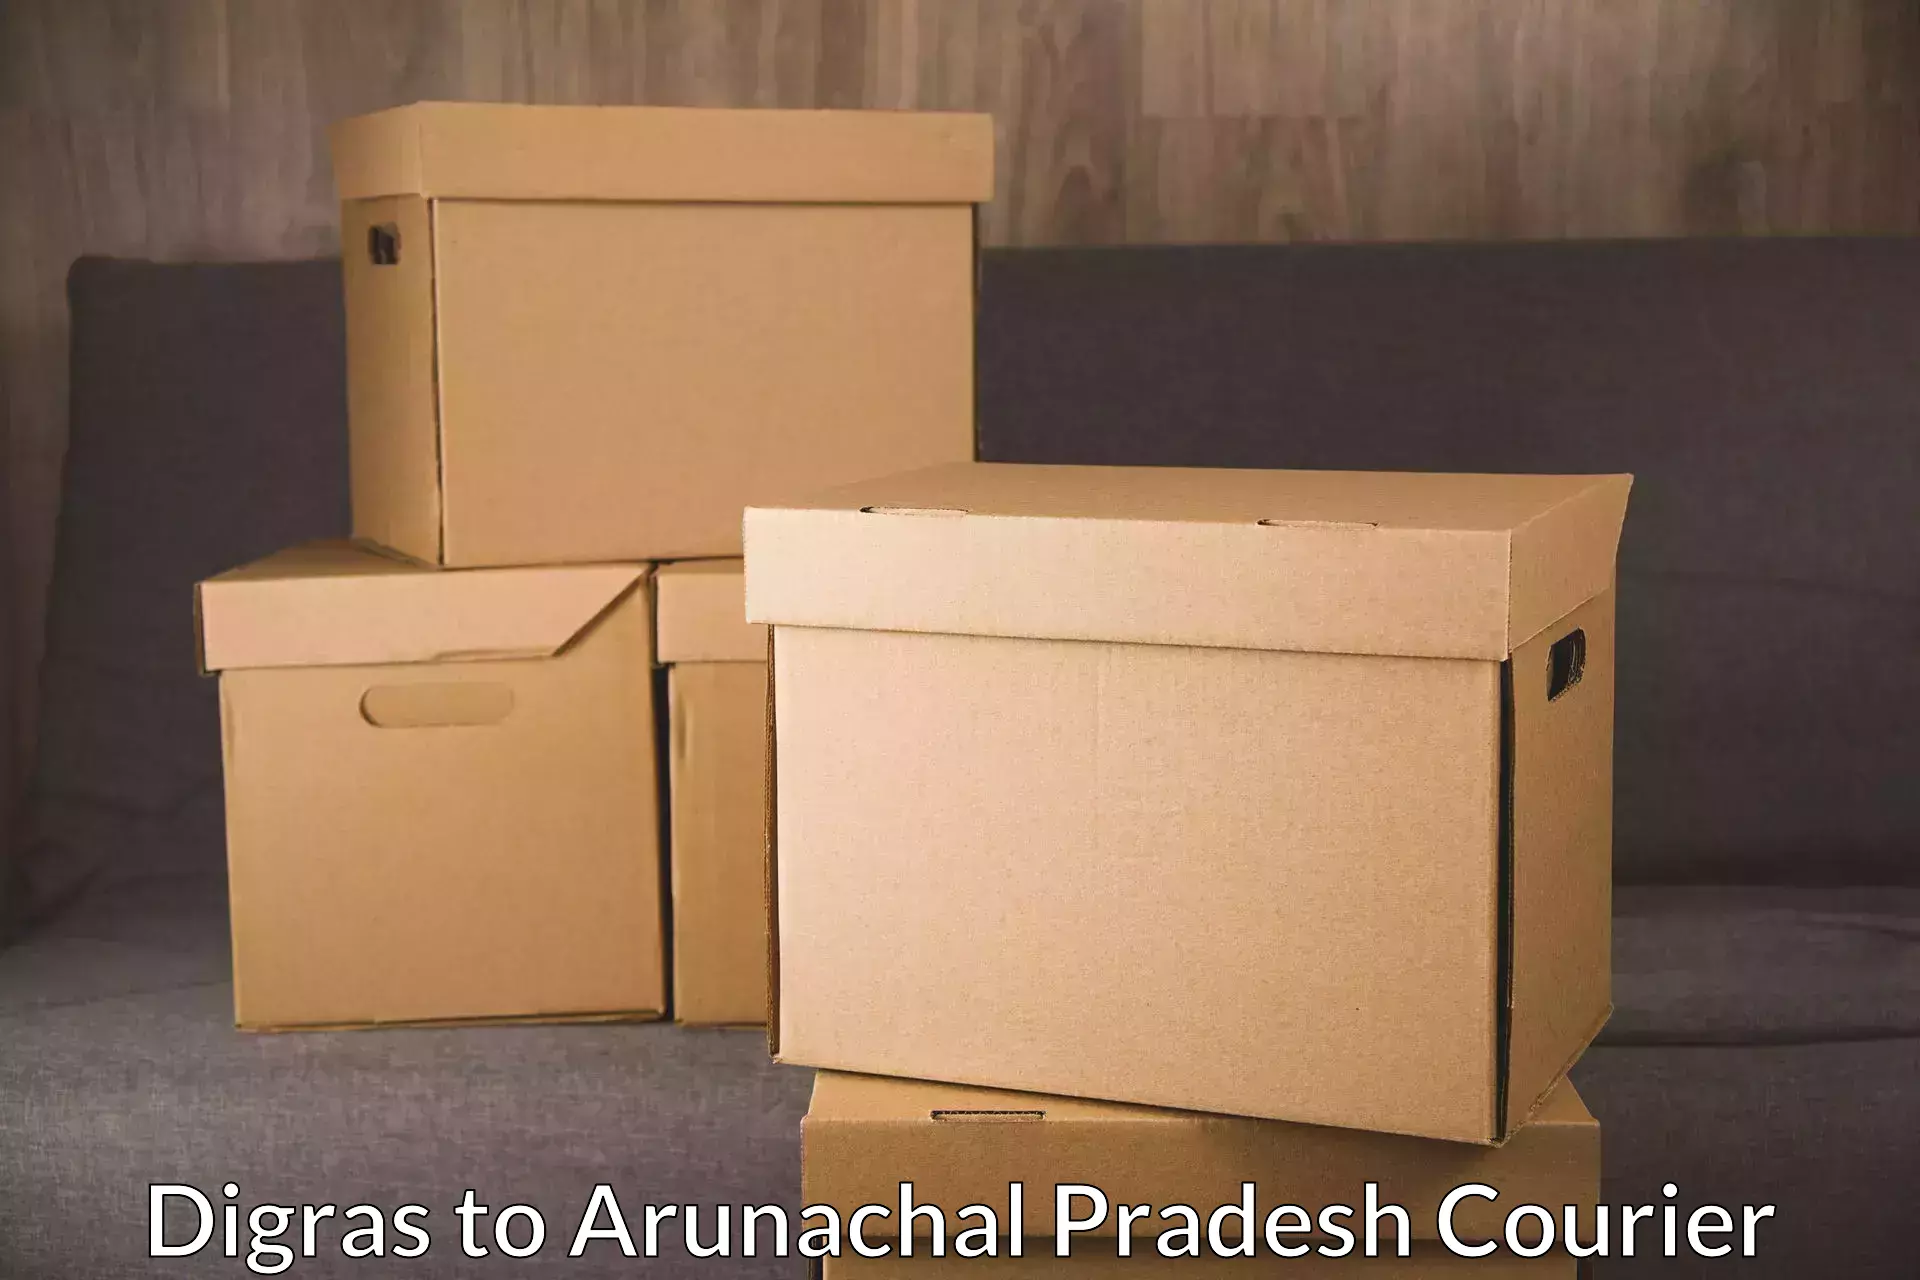 Full-service courier options in Digras to Arunachal Pradesh